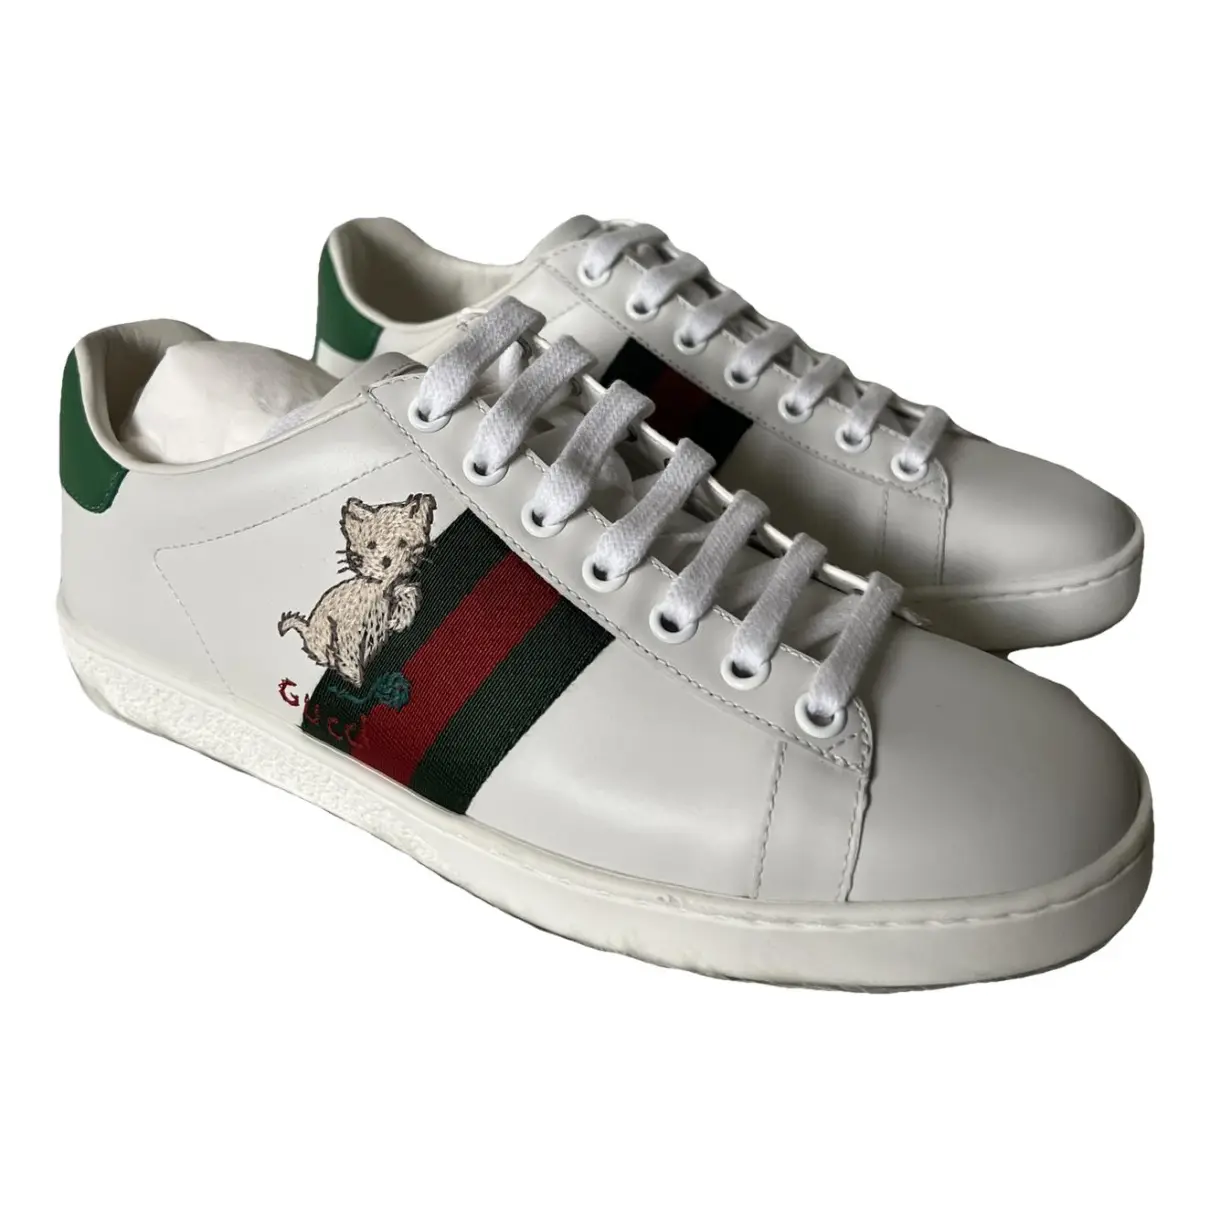 Ace leather trainers